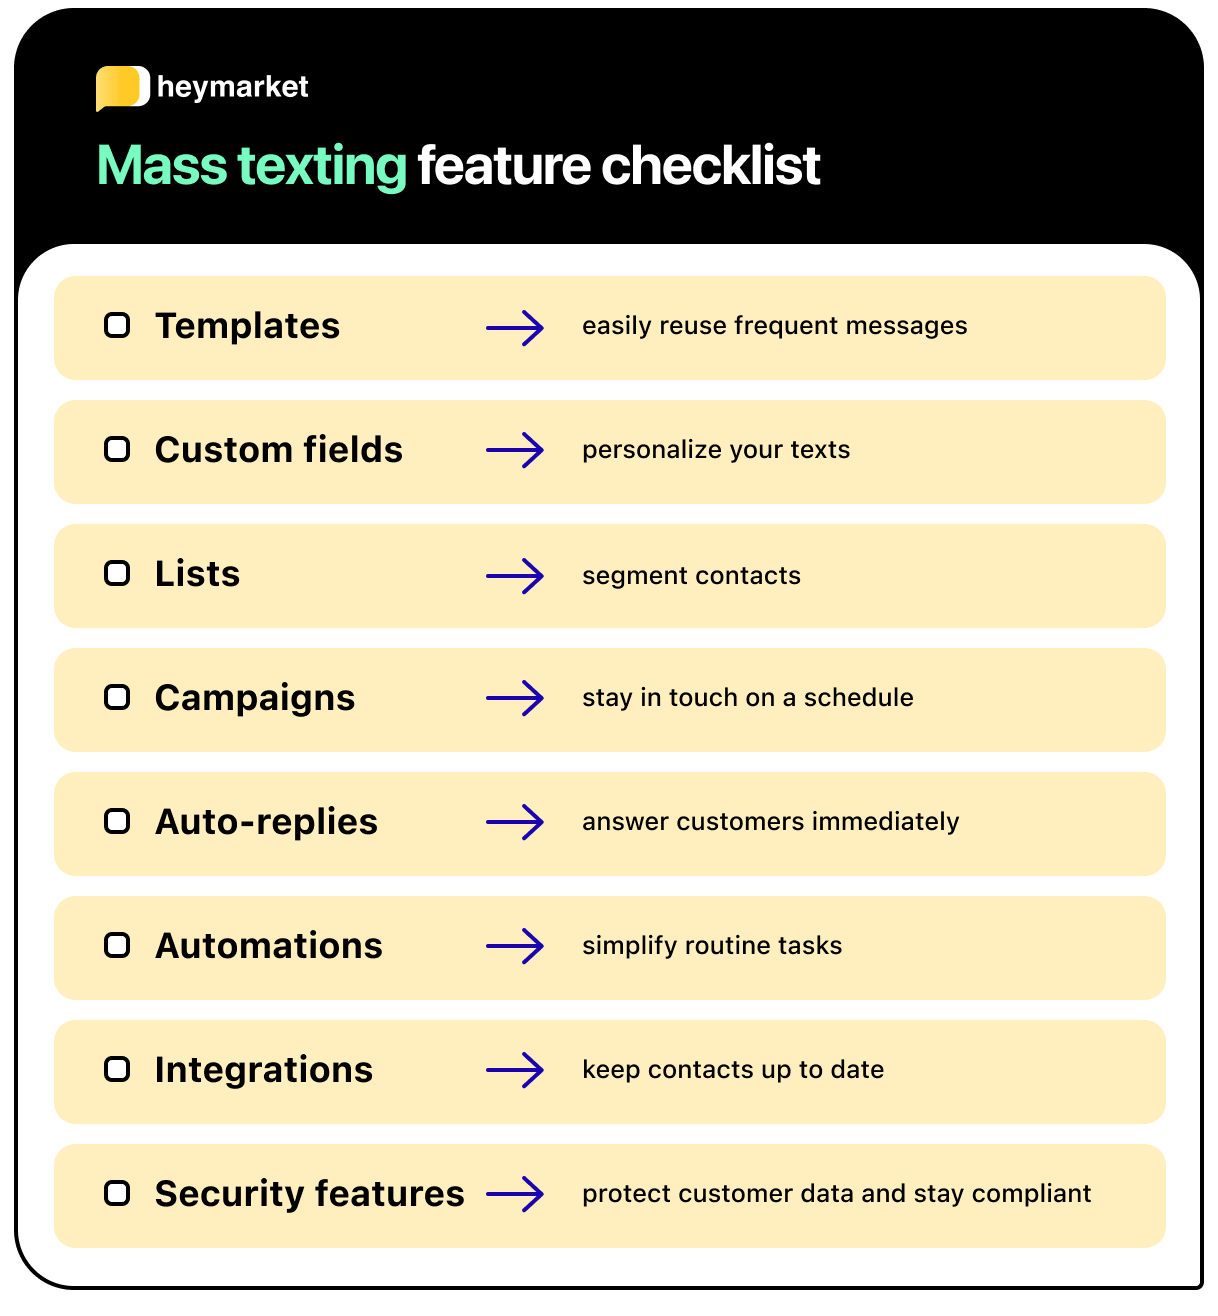 List of mass text messaging features: Templates, custom fields, lists, campaigns, auto-replies, automations, integrations, and security features